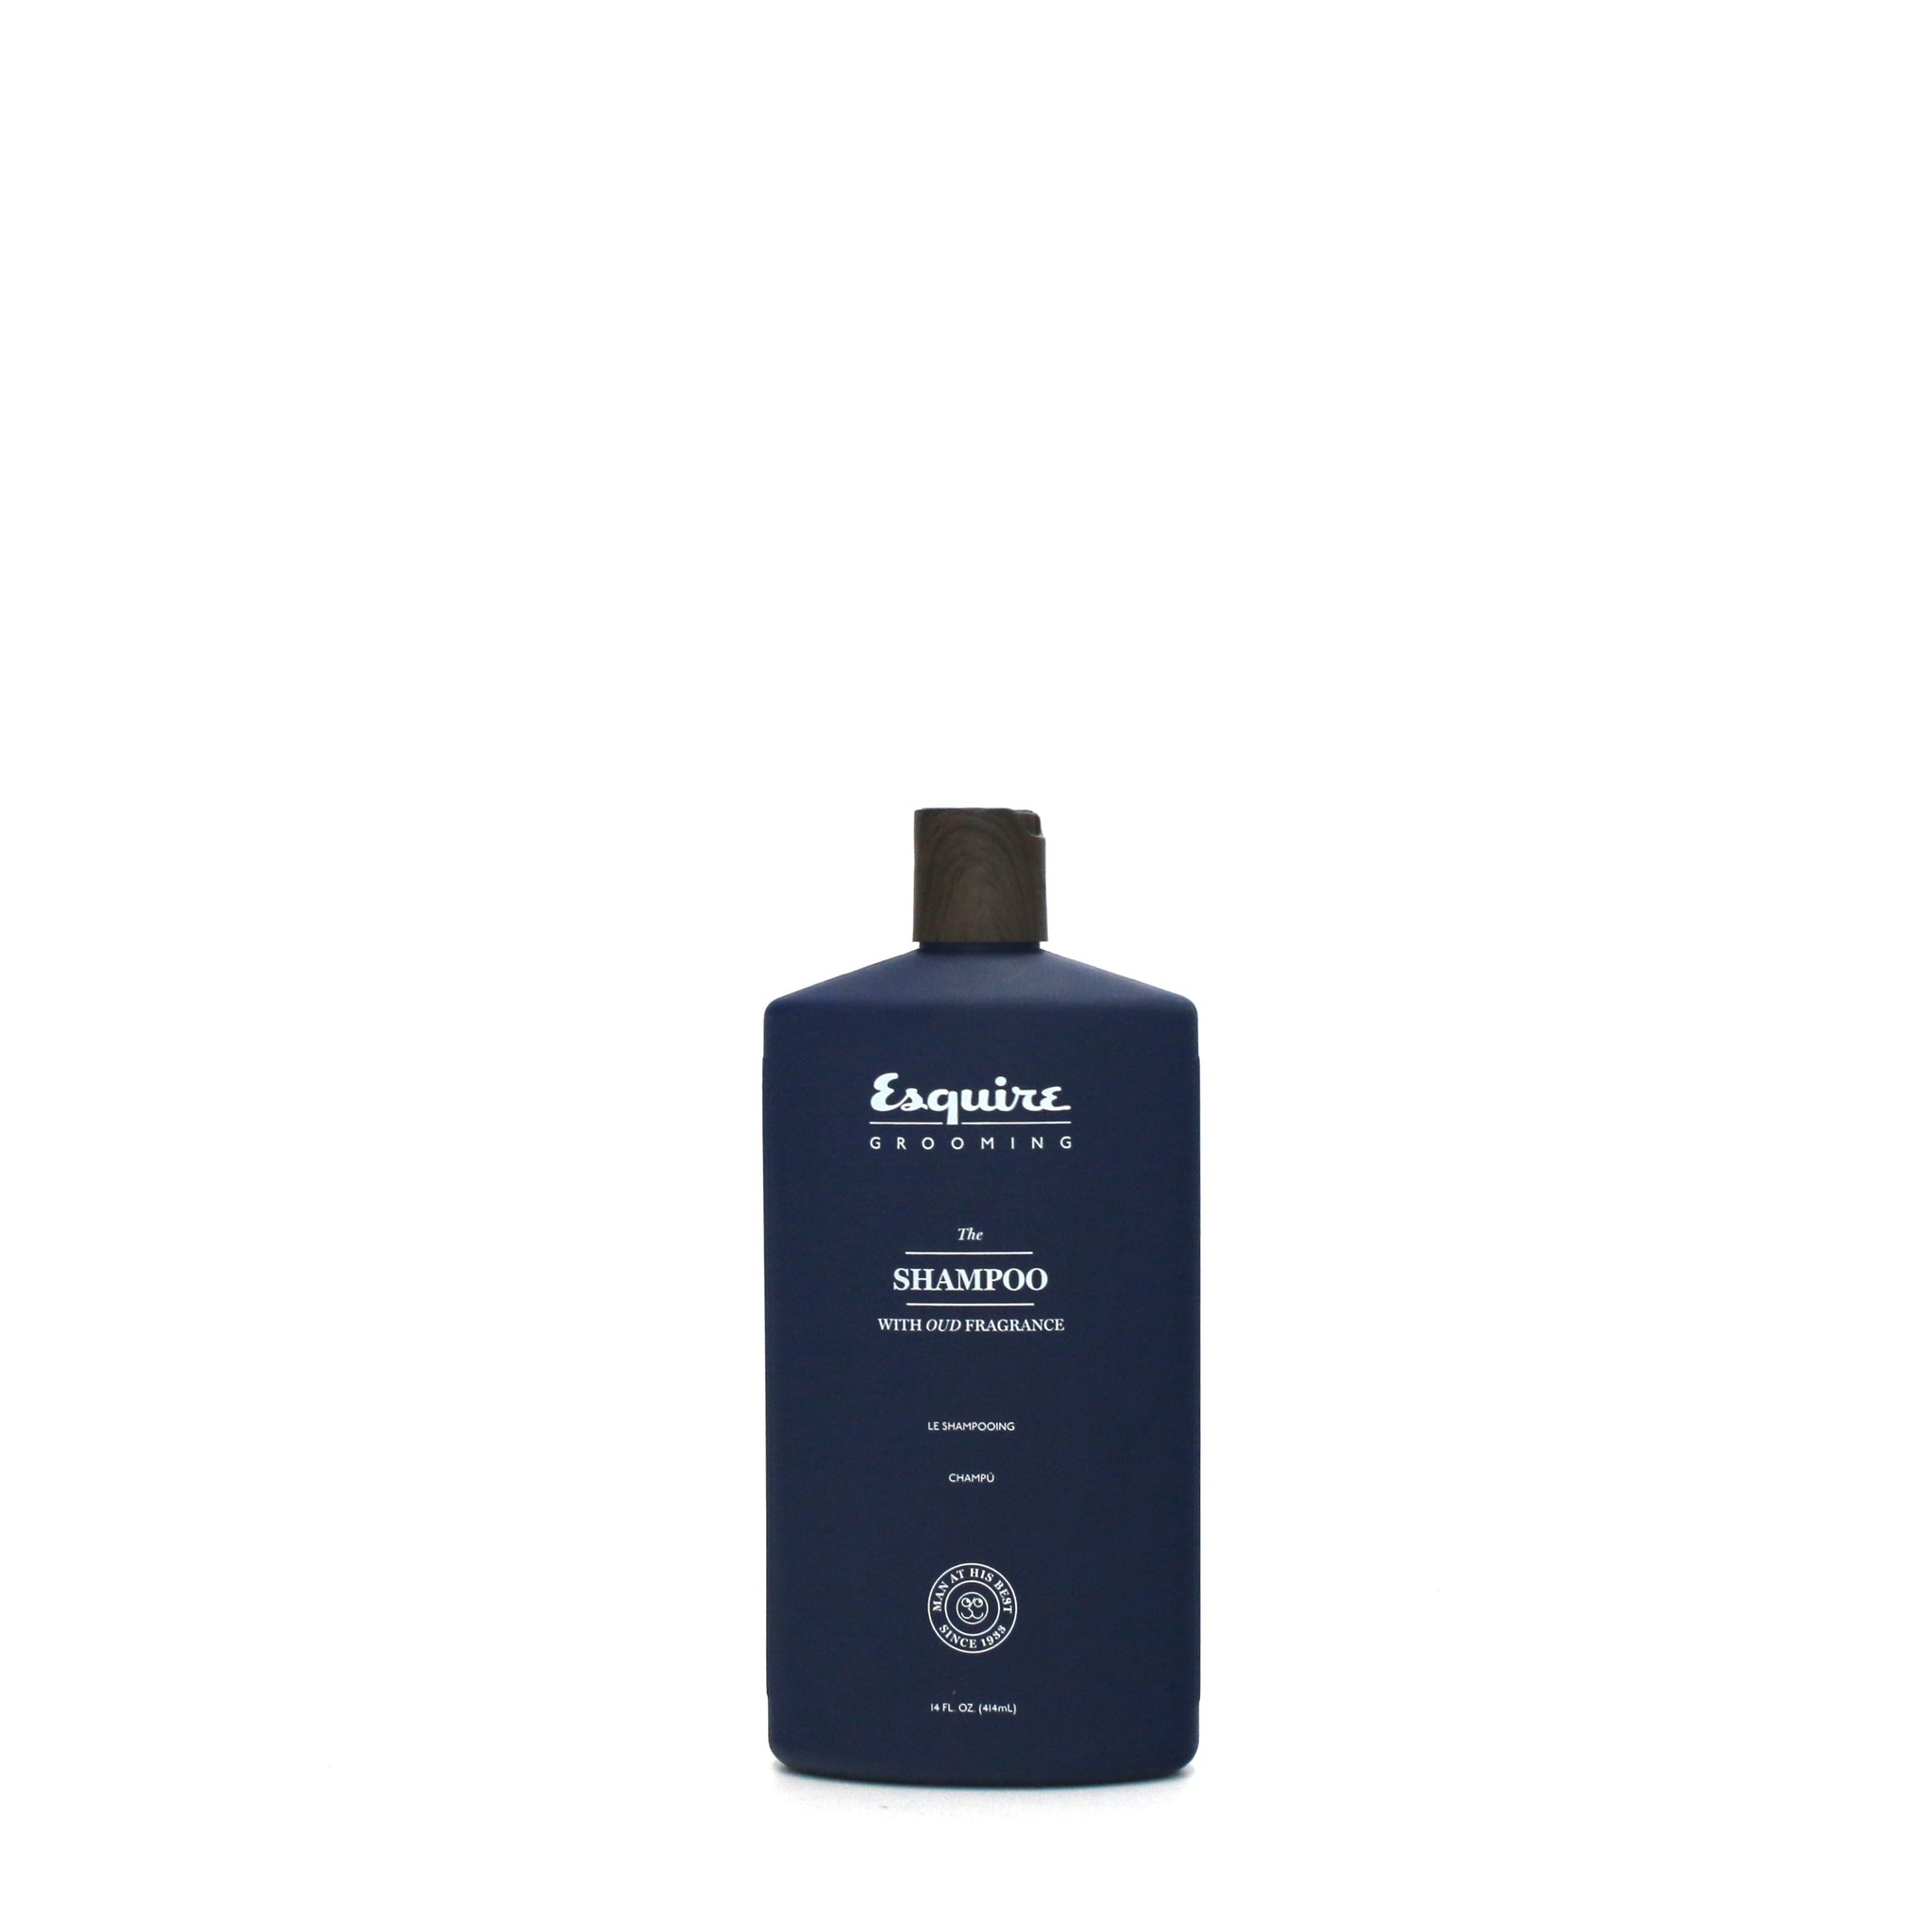 ESQUIRE Grooming the Shampoo With Oud Fragrance 14 oz